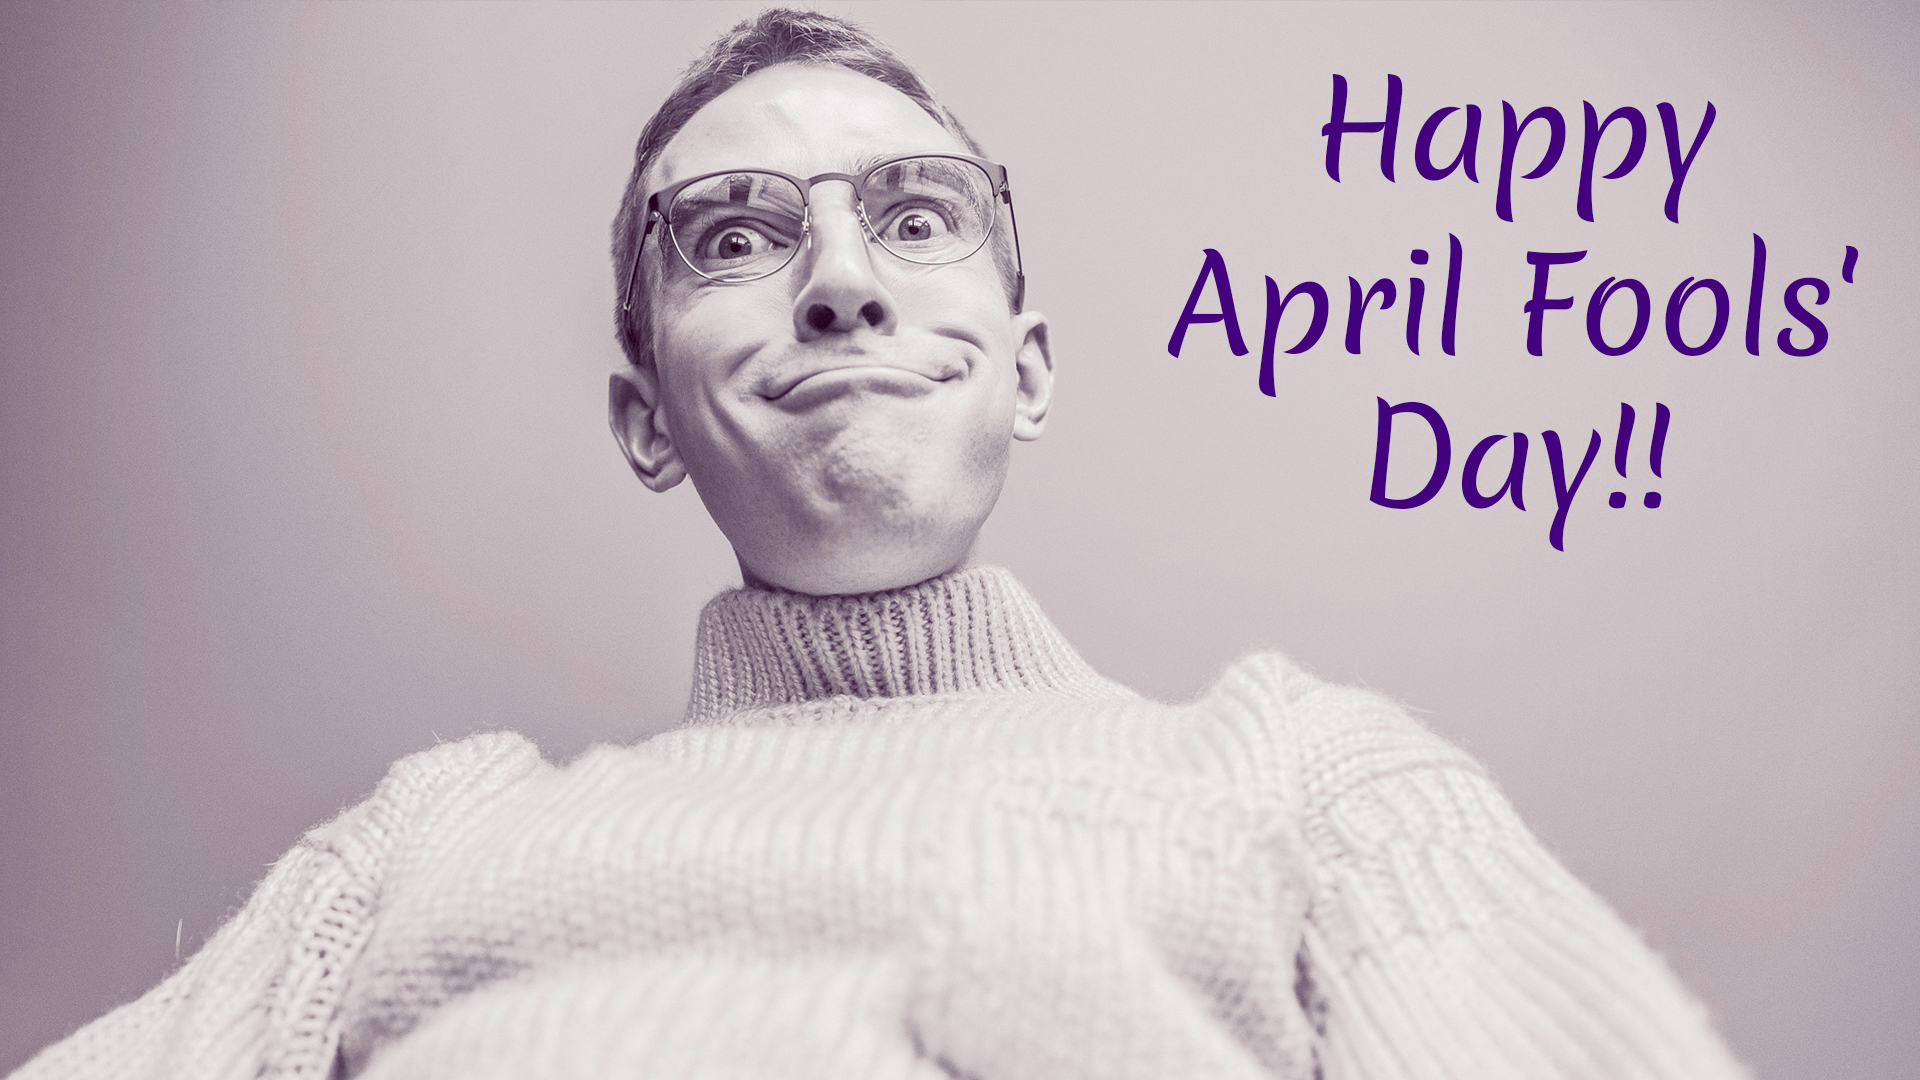 April Fools Day Images Funny Jokes Download For Free Online Best Whatsapp Stickers New Prank Gif Videos To Wish Happy April Fools Day 2019 Latestly